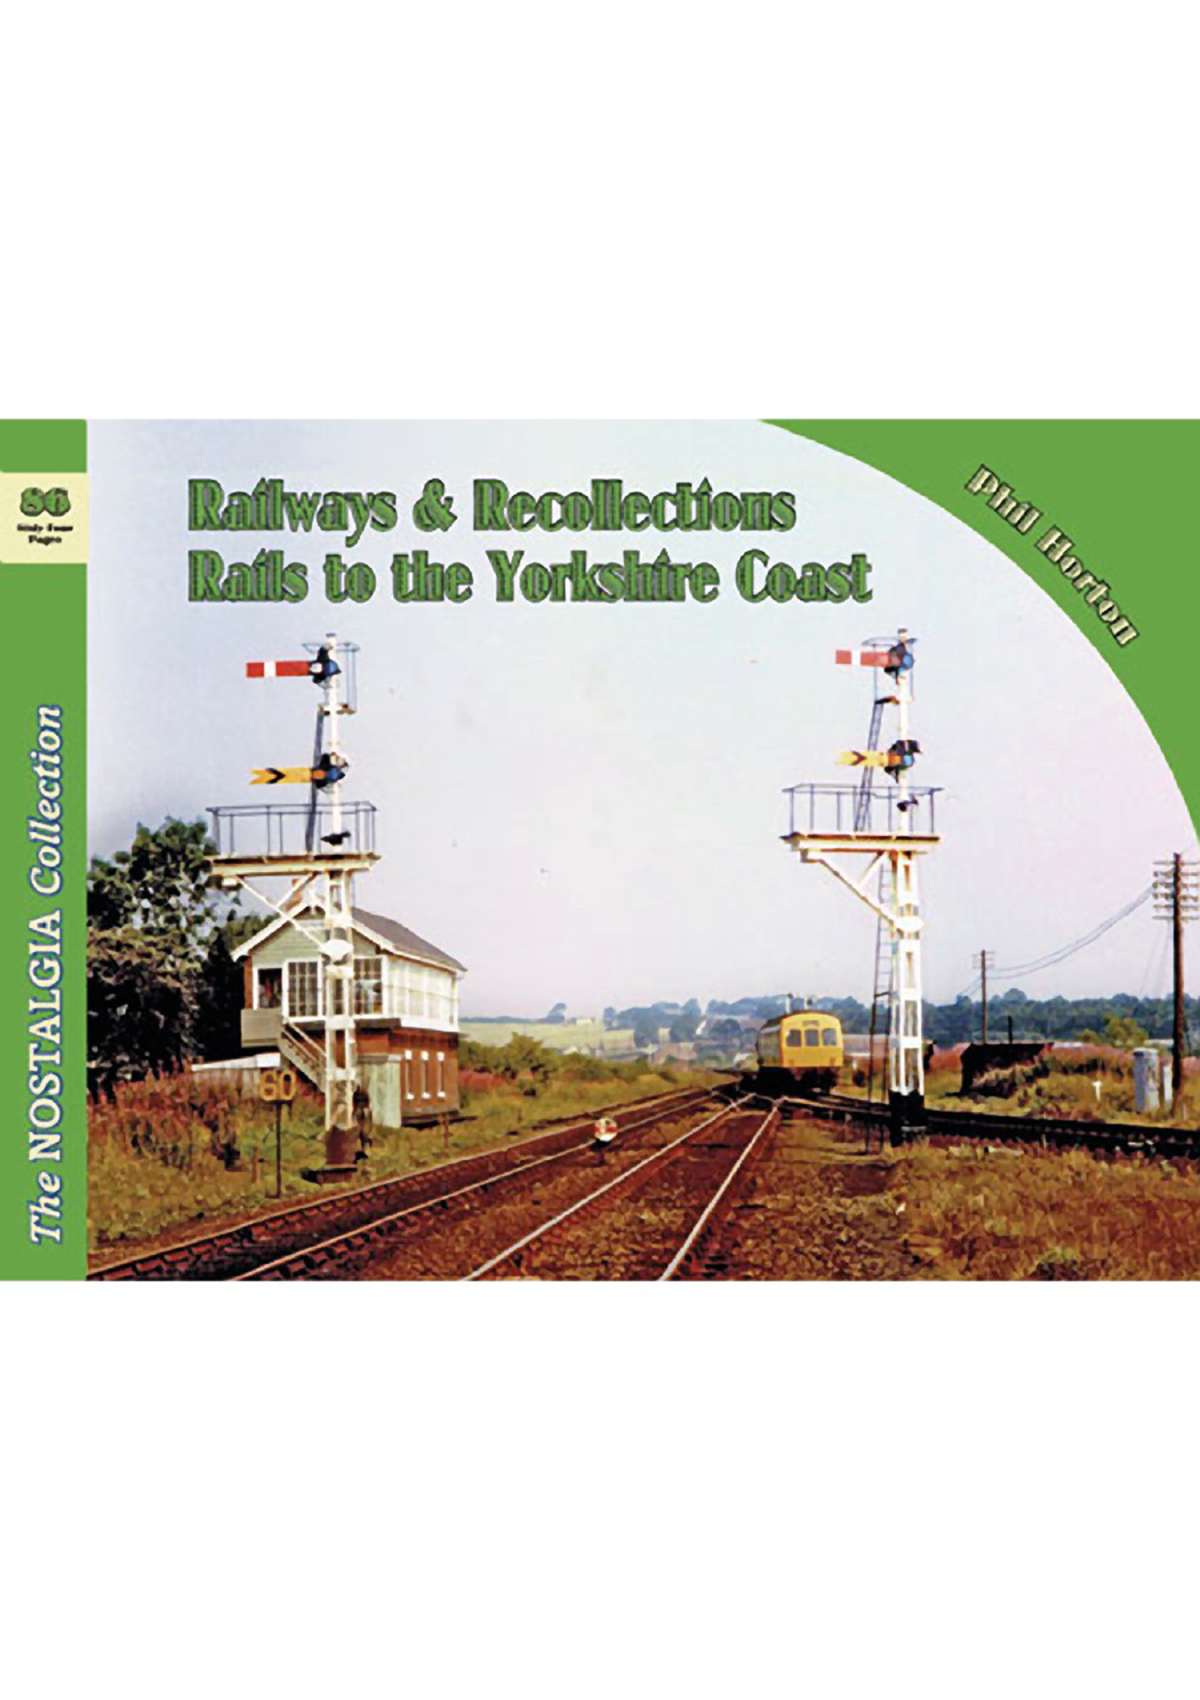 5249 : Railway & Recollections 86 Rails to the Yorkshire Coast